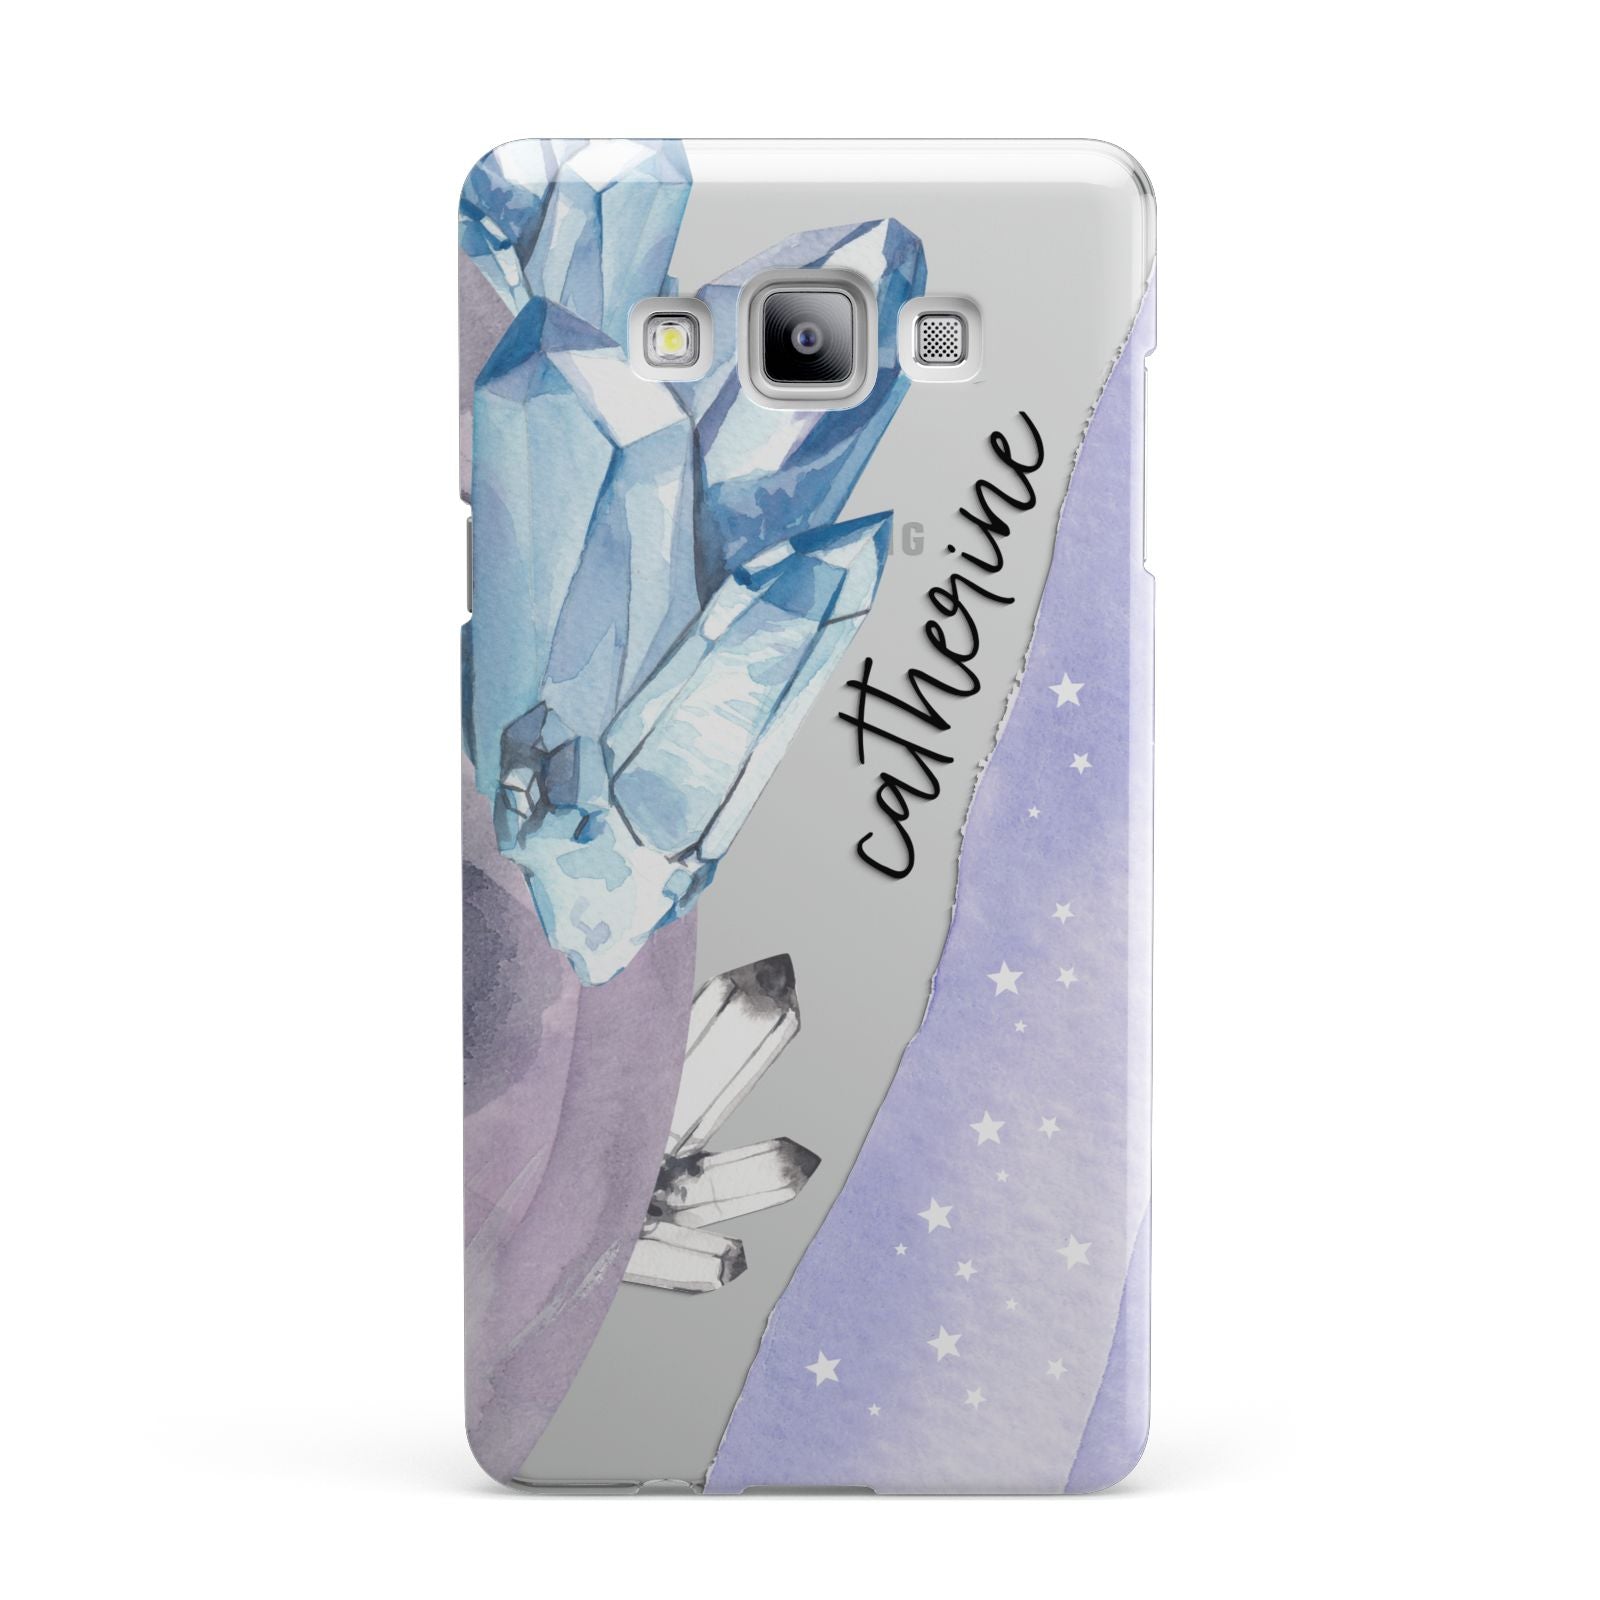 Crystals Personalised Name Samsung Galaxy A7 2015 Case